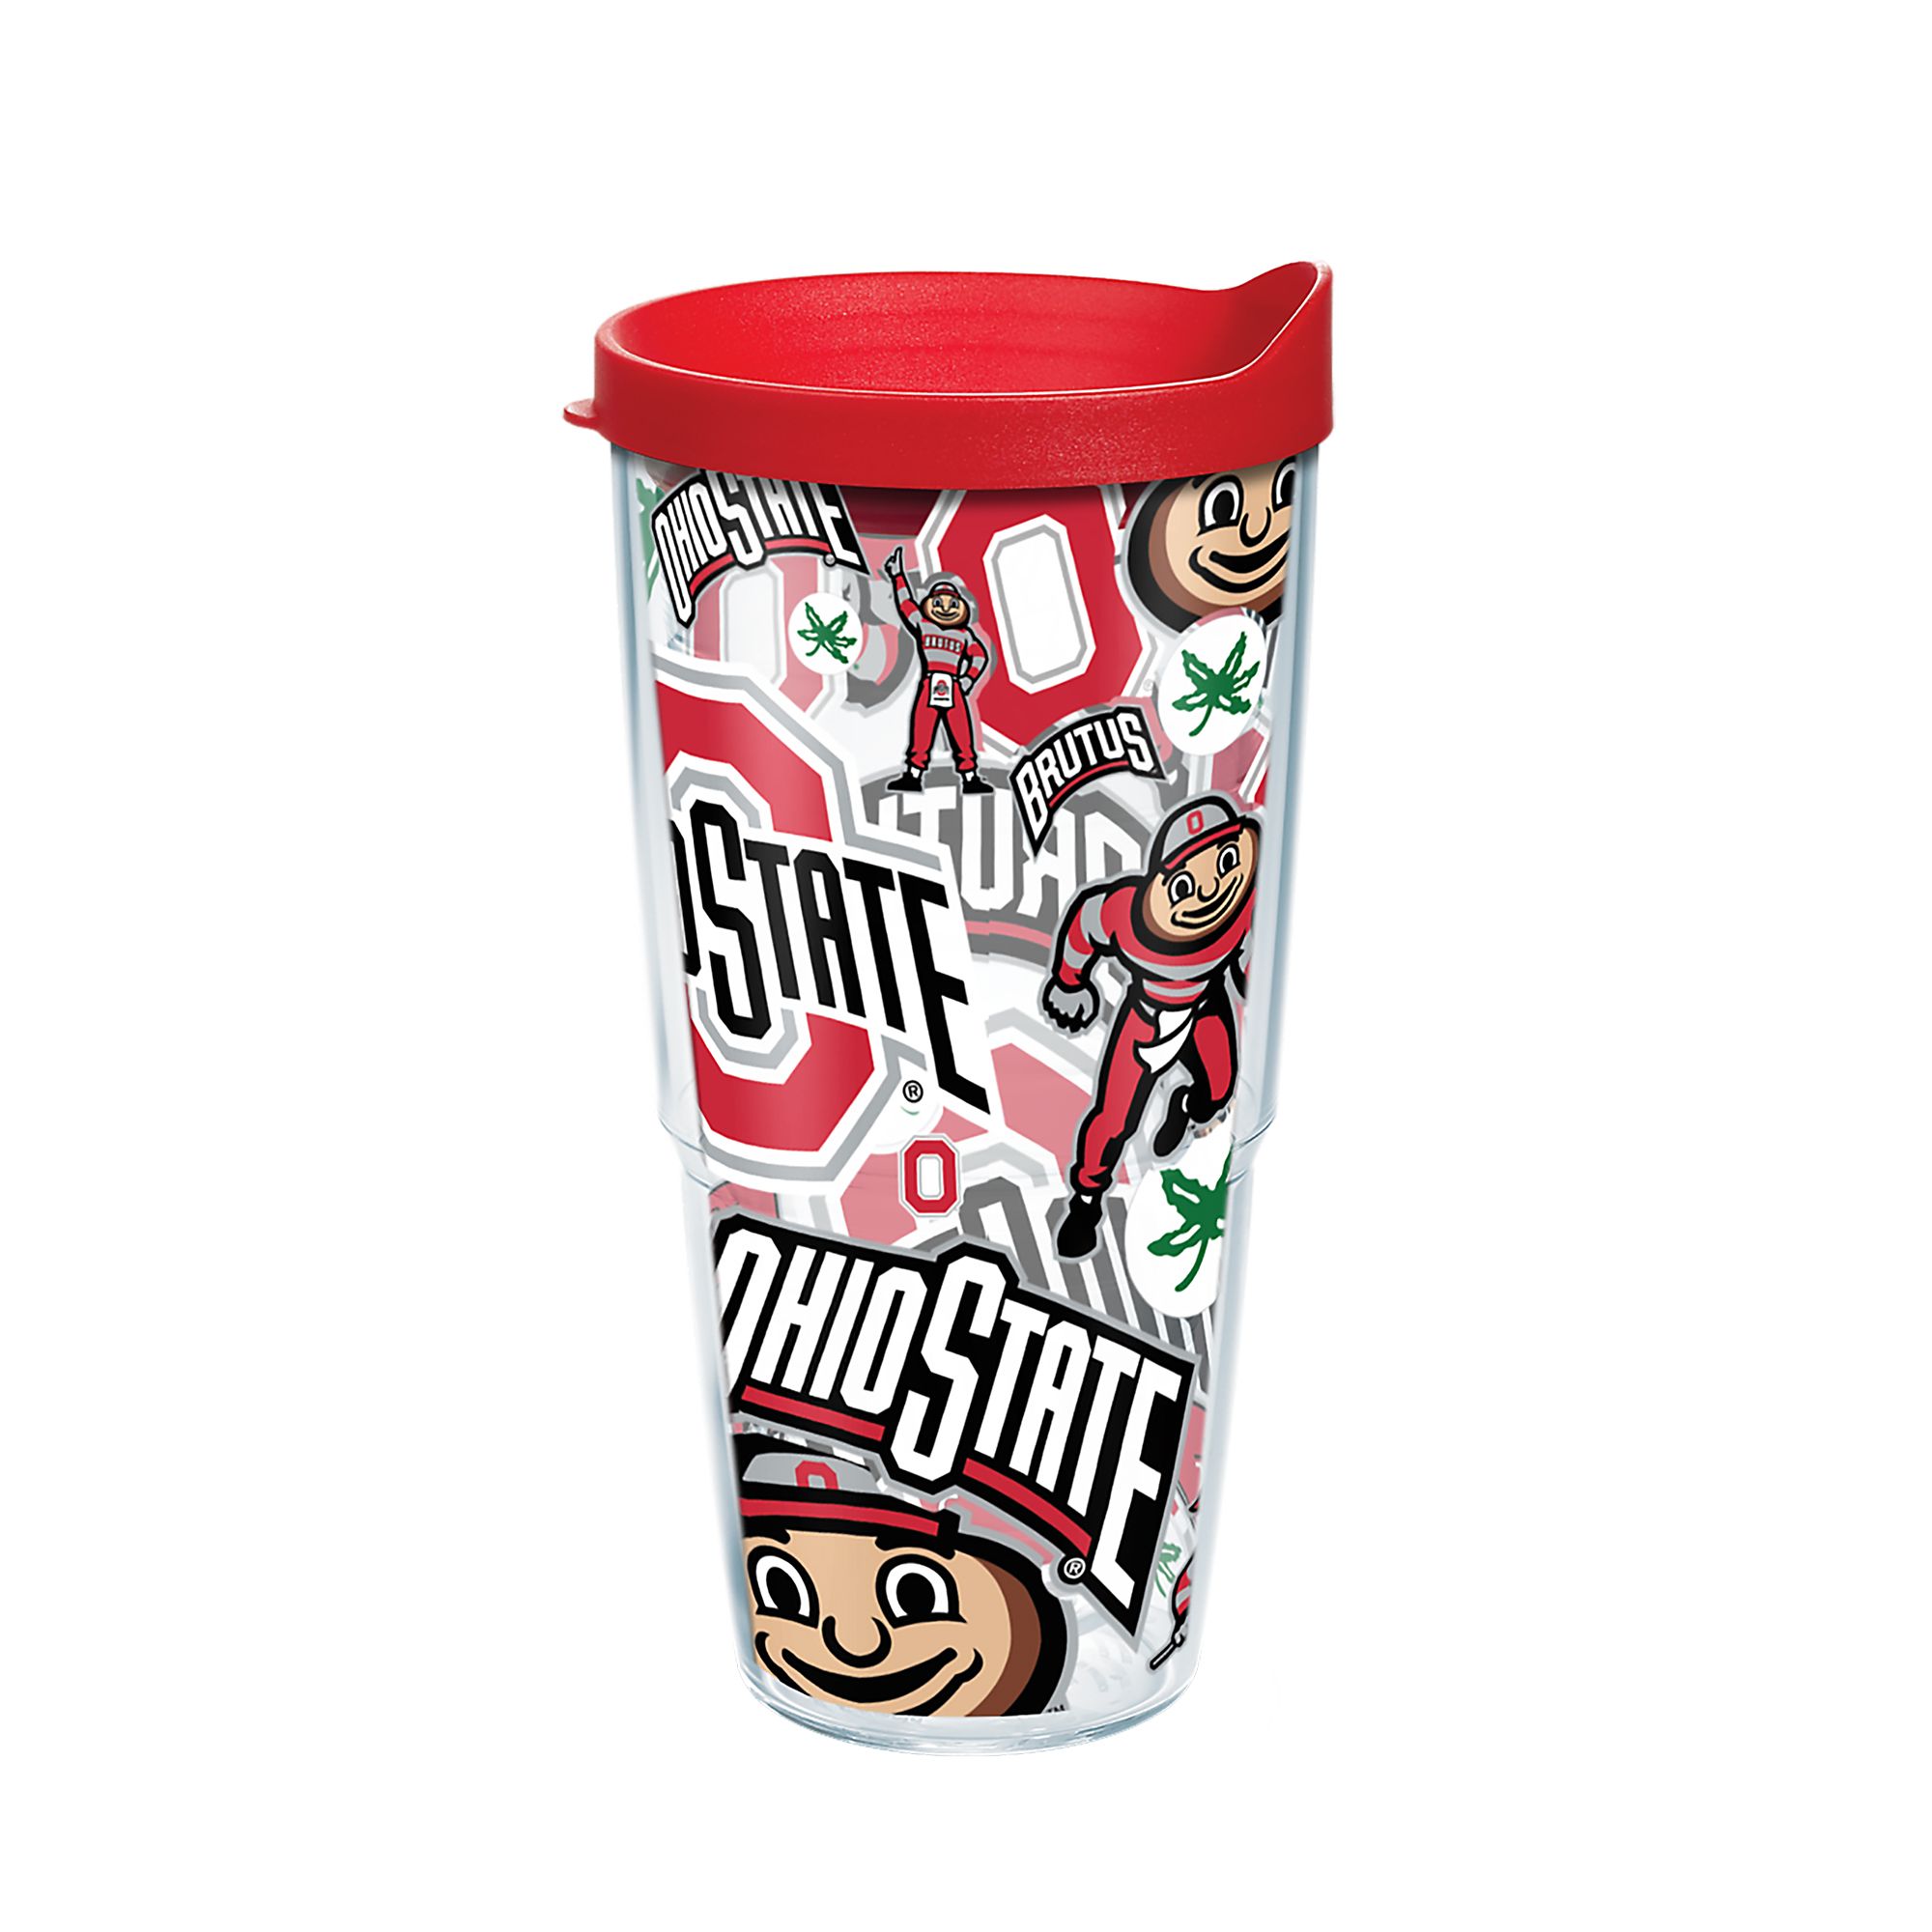 Tervis Ohio State Buckeyes Logo Tumbler with Emblem and Red Lid 24oz Quartz